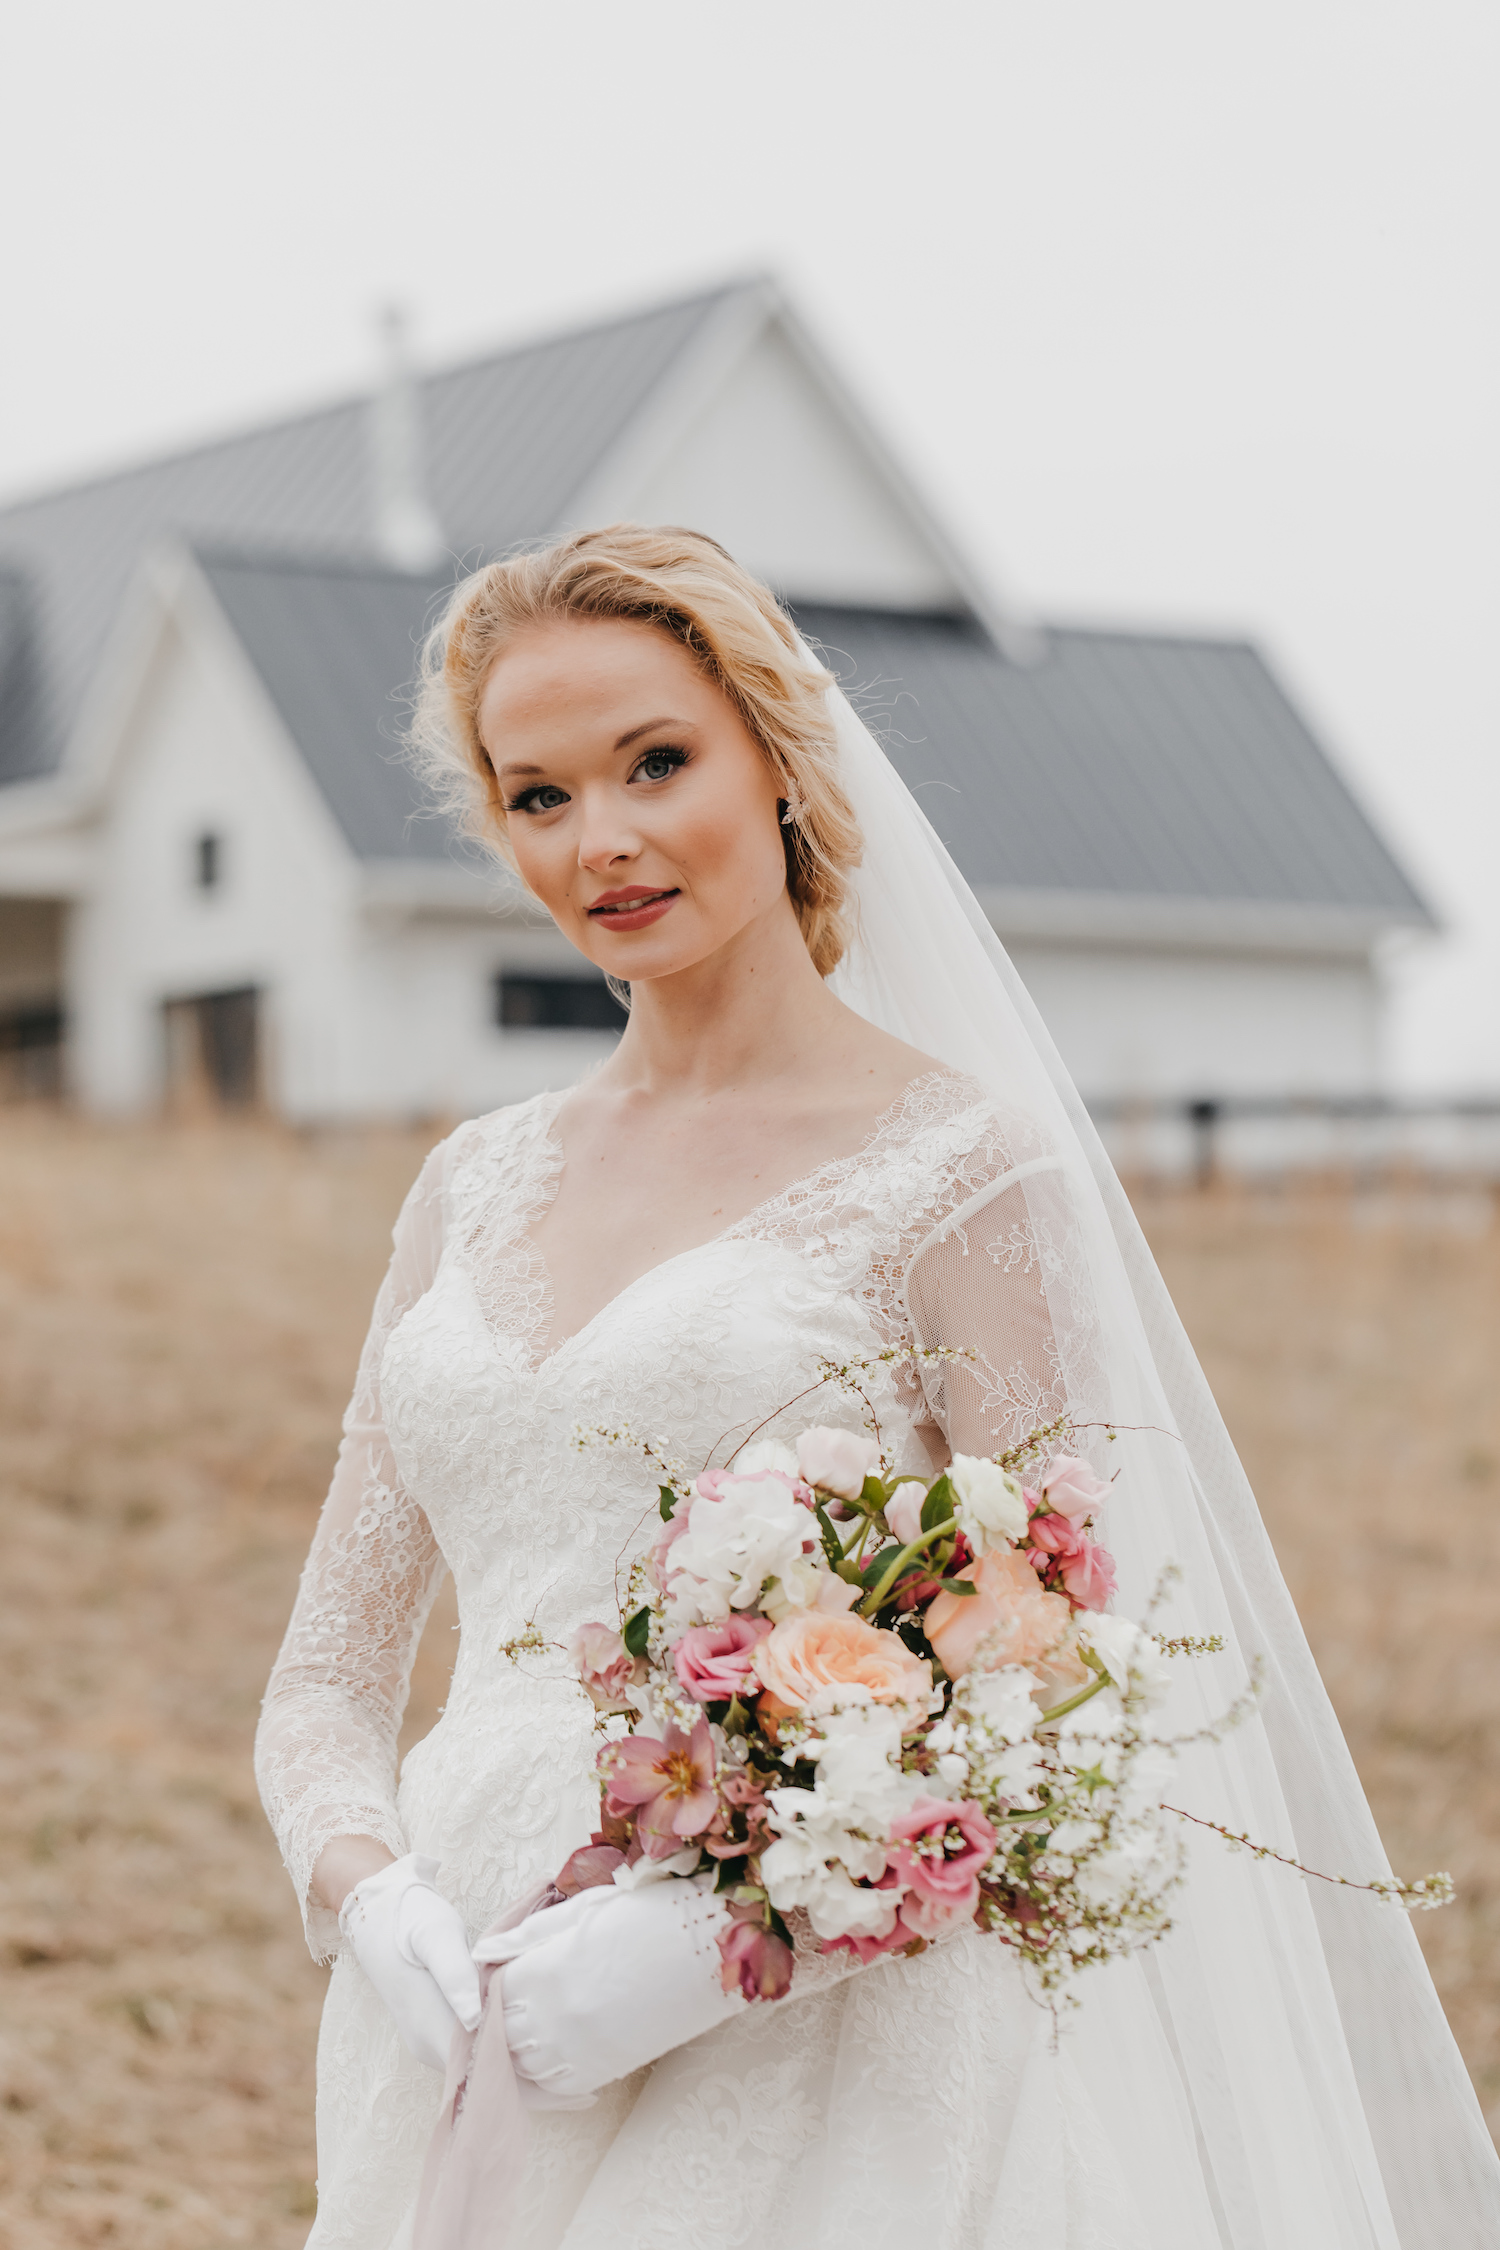 Big Spring Farm Wedding: A Complete Planning Guide. Stunning bride looking at the camera as she poses in front of the barn.